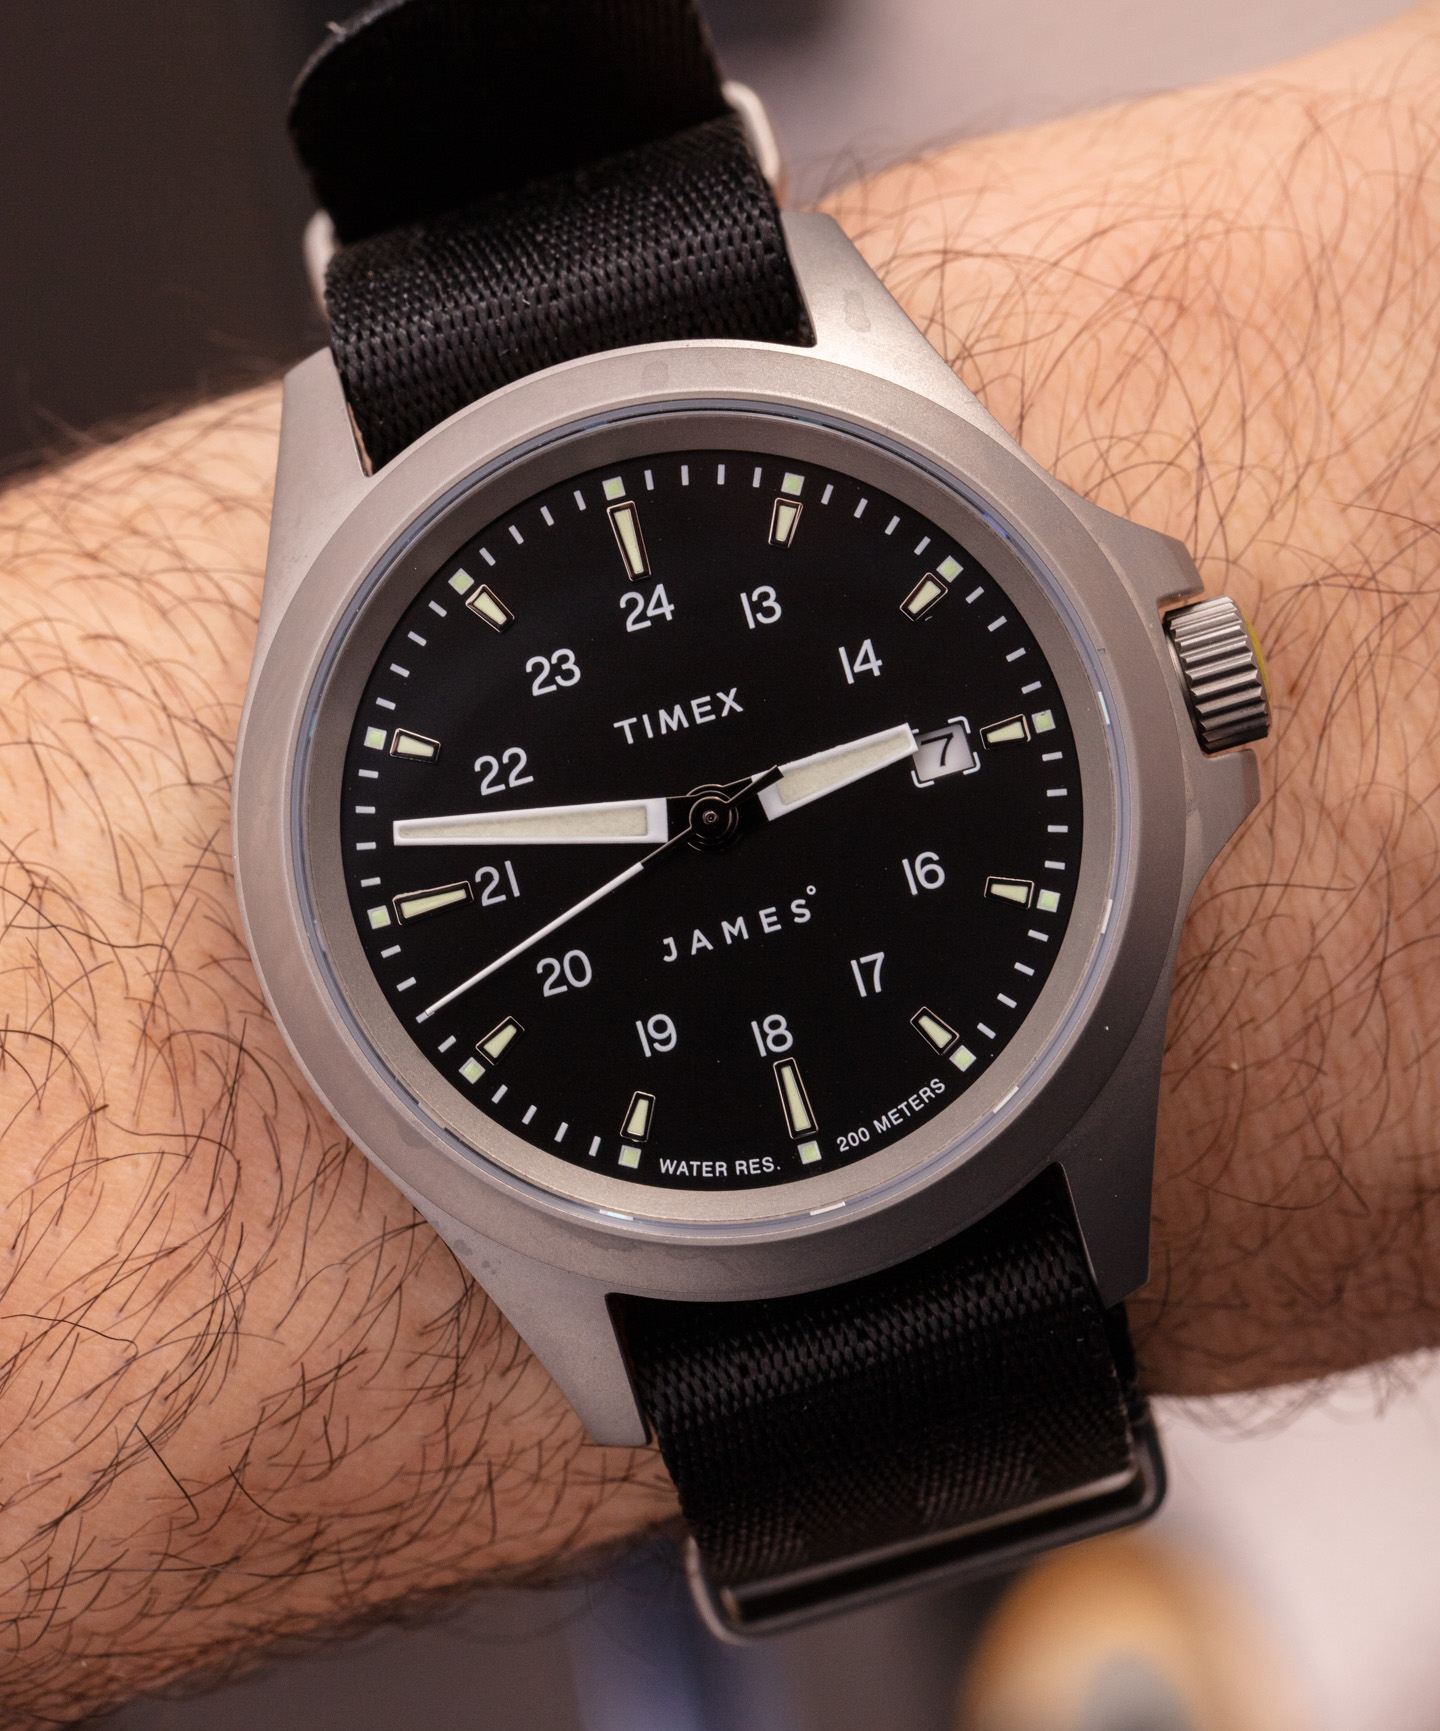 Hamilton Khaki Field Expedition Watch Review - WatchReviewBlog